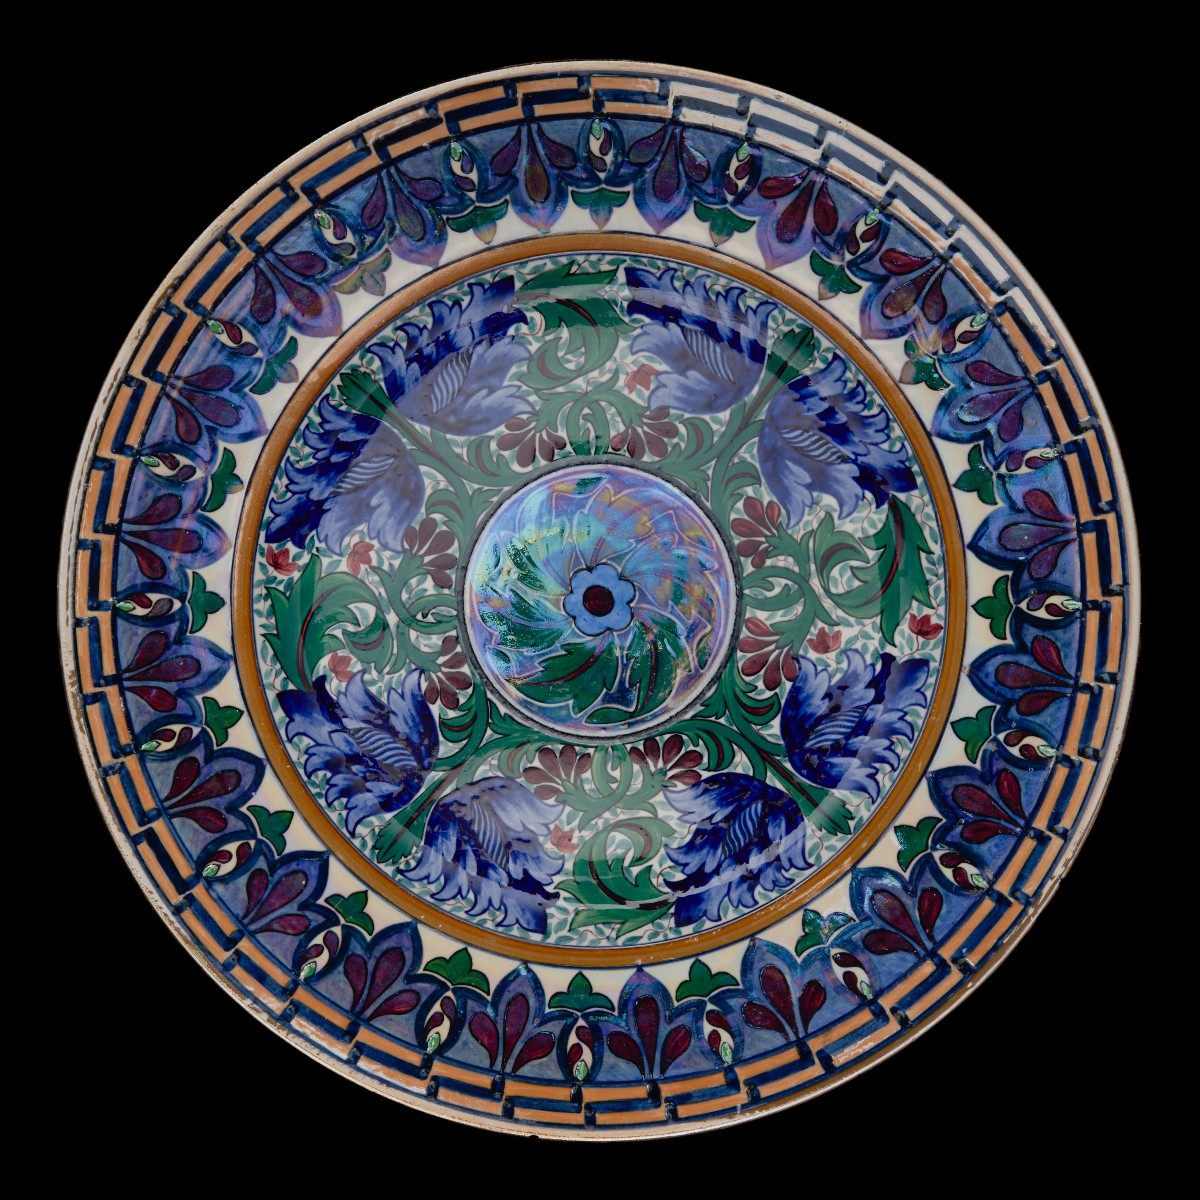 Art Nouveau is our focus for this week’s #fridayfinds post. We recently unpacked this glamorous 1930 ‘Rhodian’ pattern plate, decorated with bold underglaze enamels. The iridescent effect is produced by application of ‘Mother of Pearl’ lustre which is applied overglaze.